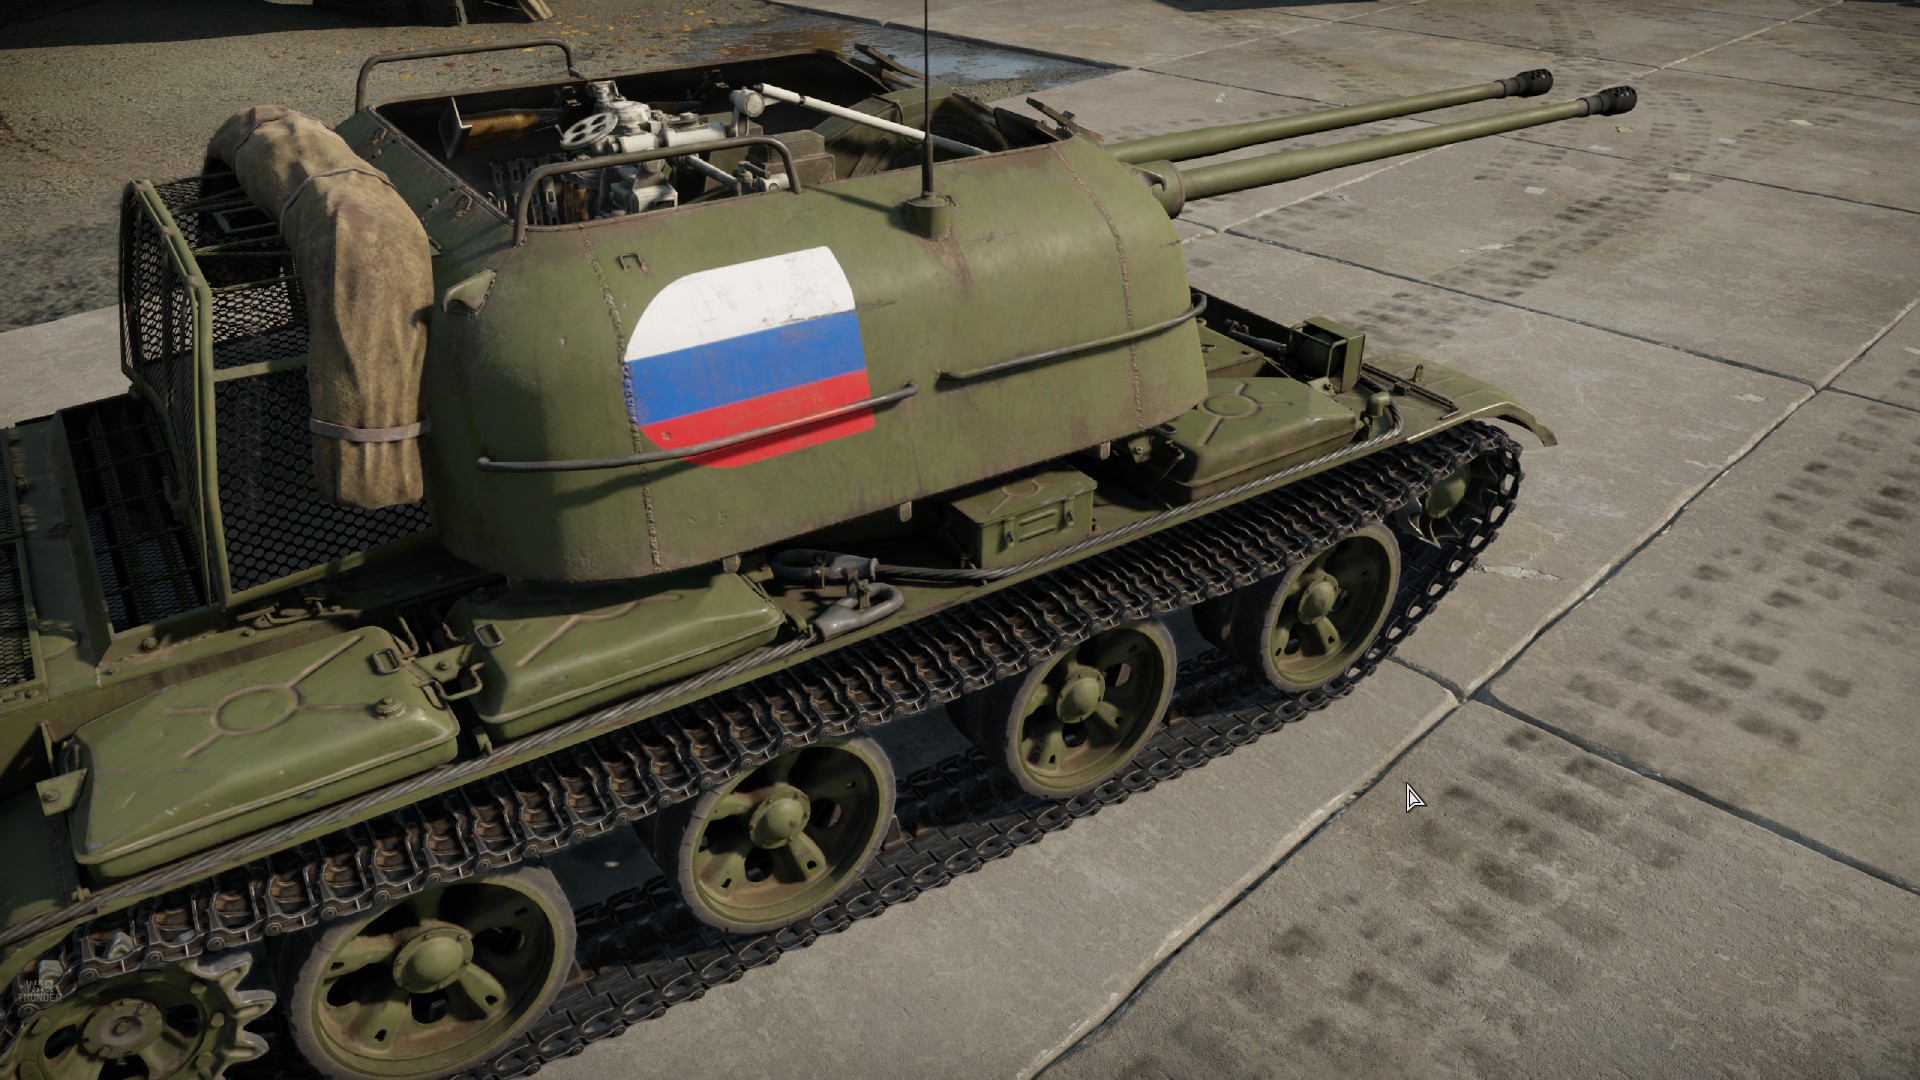 War Thunder - General Guide for Crafting and Secrets - Playthrough - Yugoslavia (Socialist Federal Republic of Yugoslavia & Democratic Federal Yugoslavia) - 87D1100